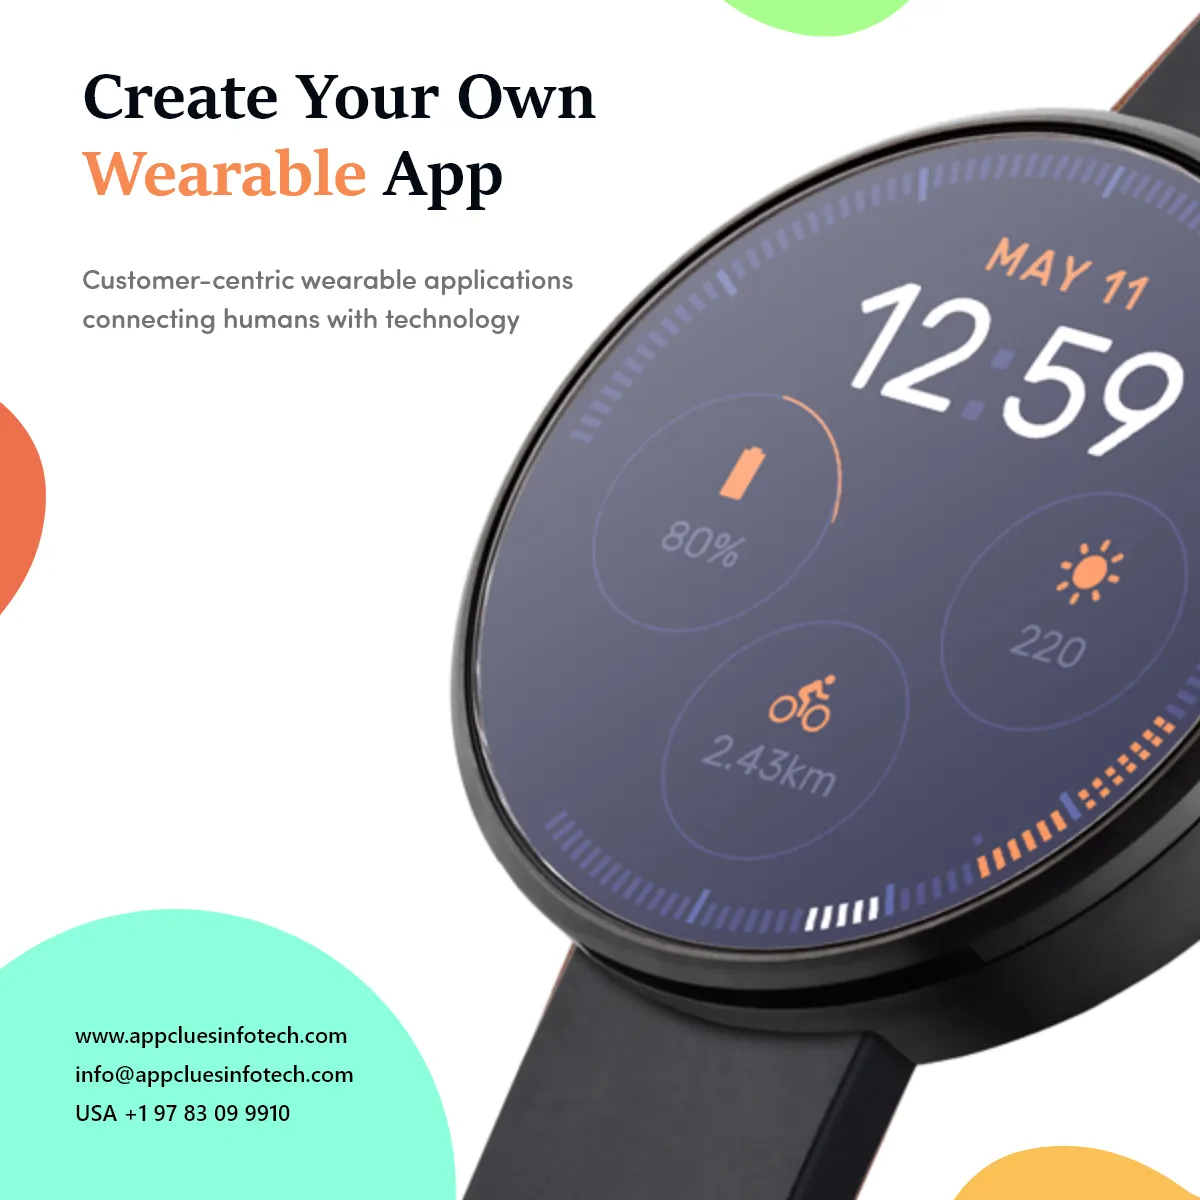 Top Wearable Mobile App Development Company in USA